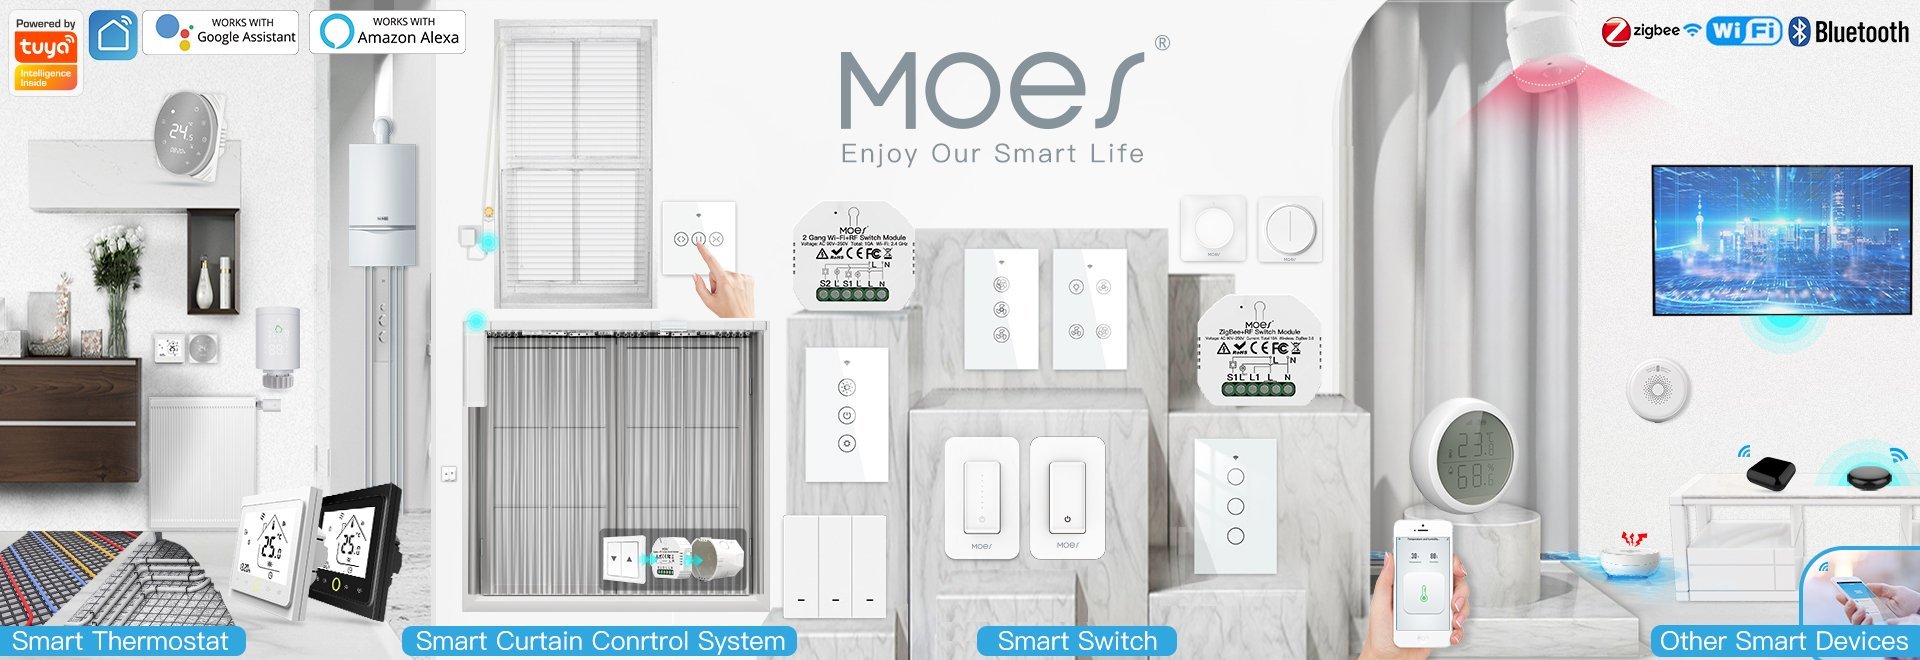 5 things to consider before installing smart light switches - MOES